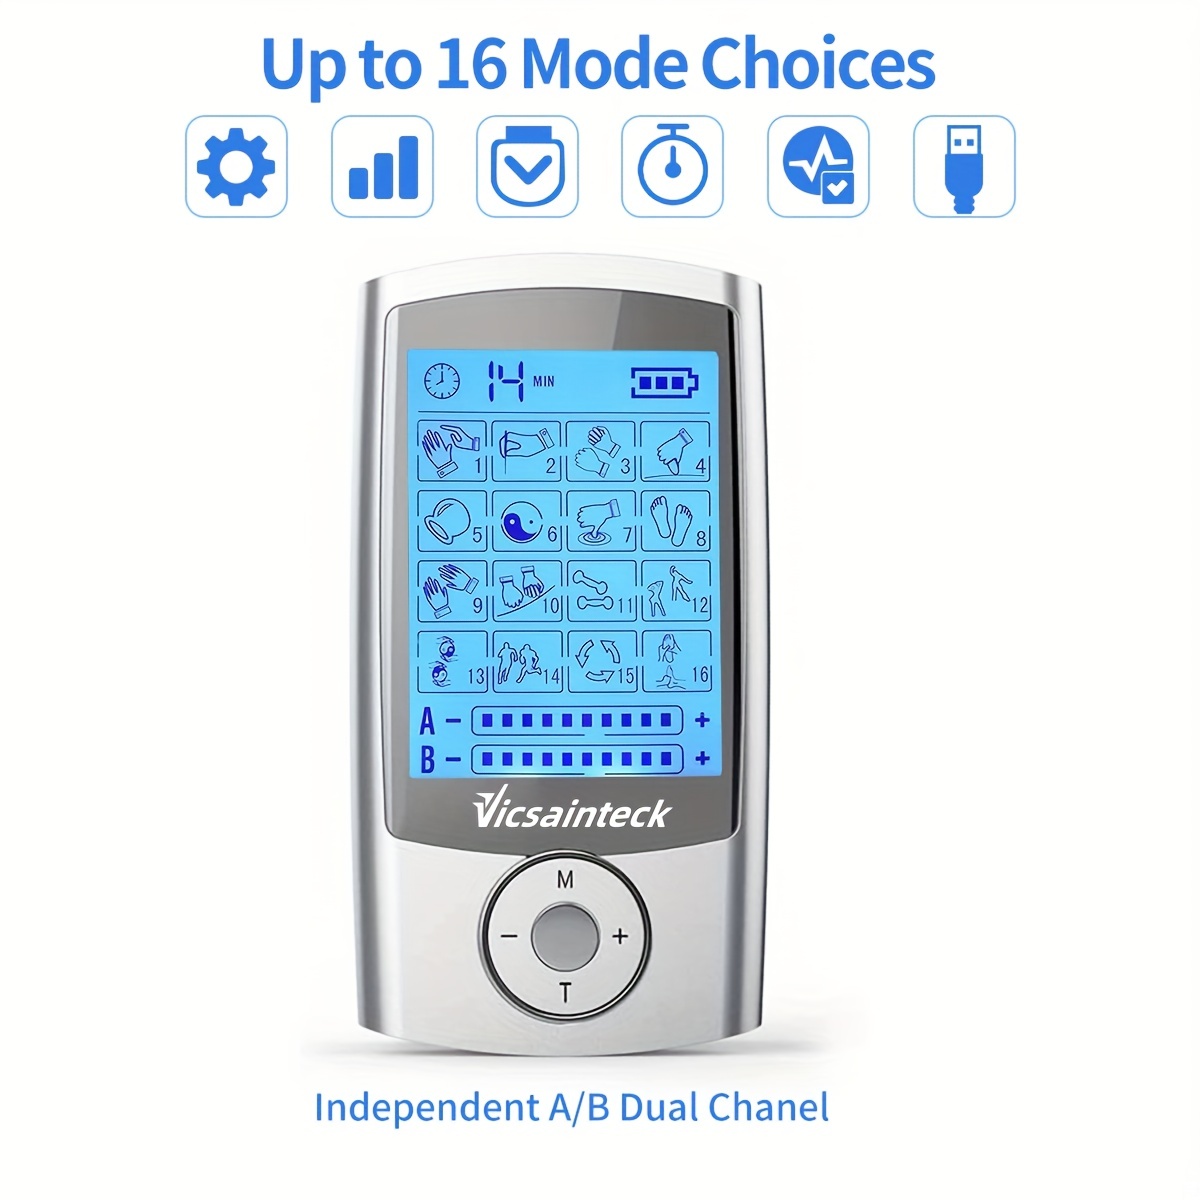 TENS 3000 Dual Channel Analog Tens Unit - Integrated Medical